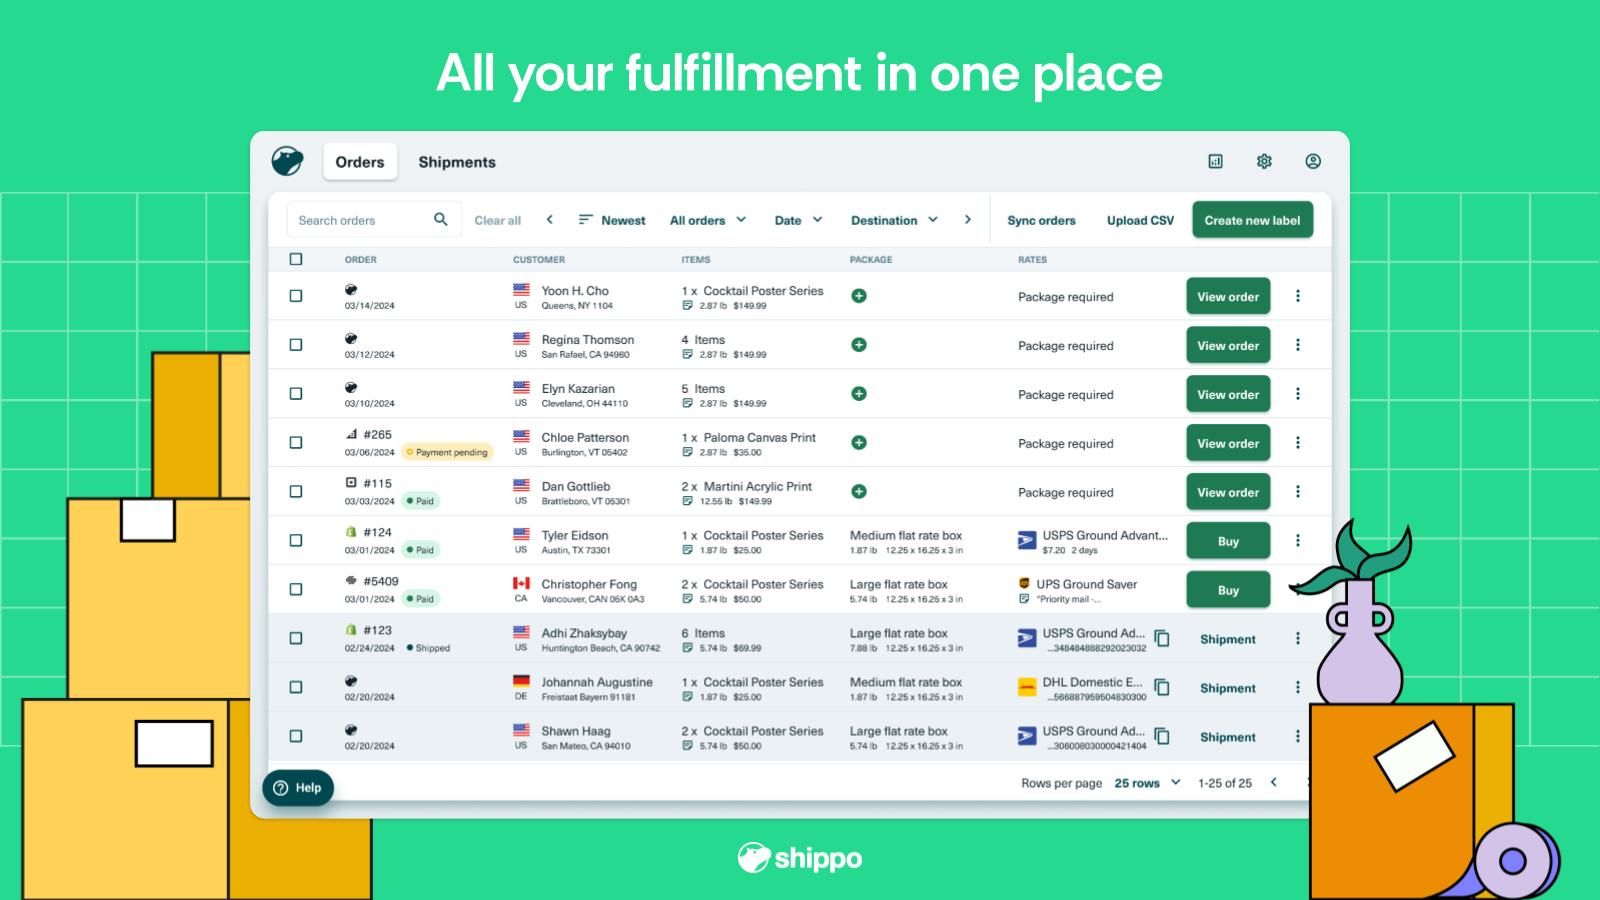 All your fulfillment in one place